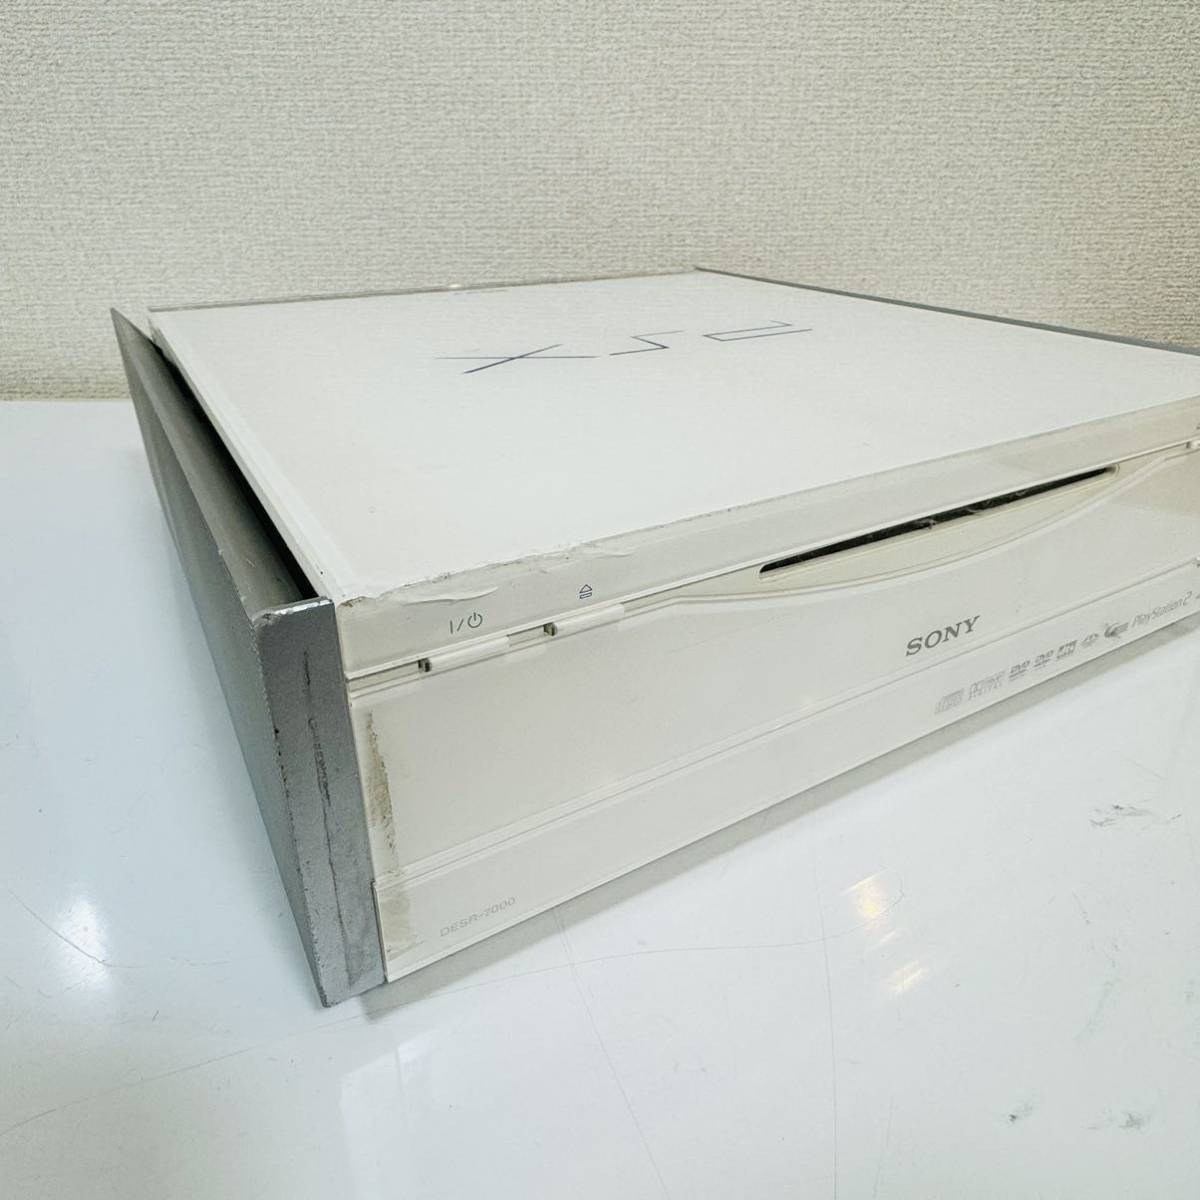 ◆SONY ソニー◆PlayStation2 PS2 PSX 本体 DVD RECORDER WITH HARD DISK DESR-7000 ホワイト/白 ジャンクの画像4